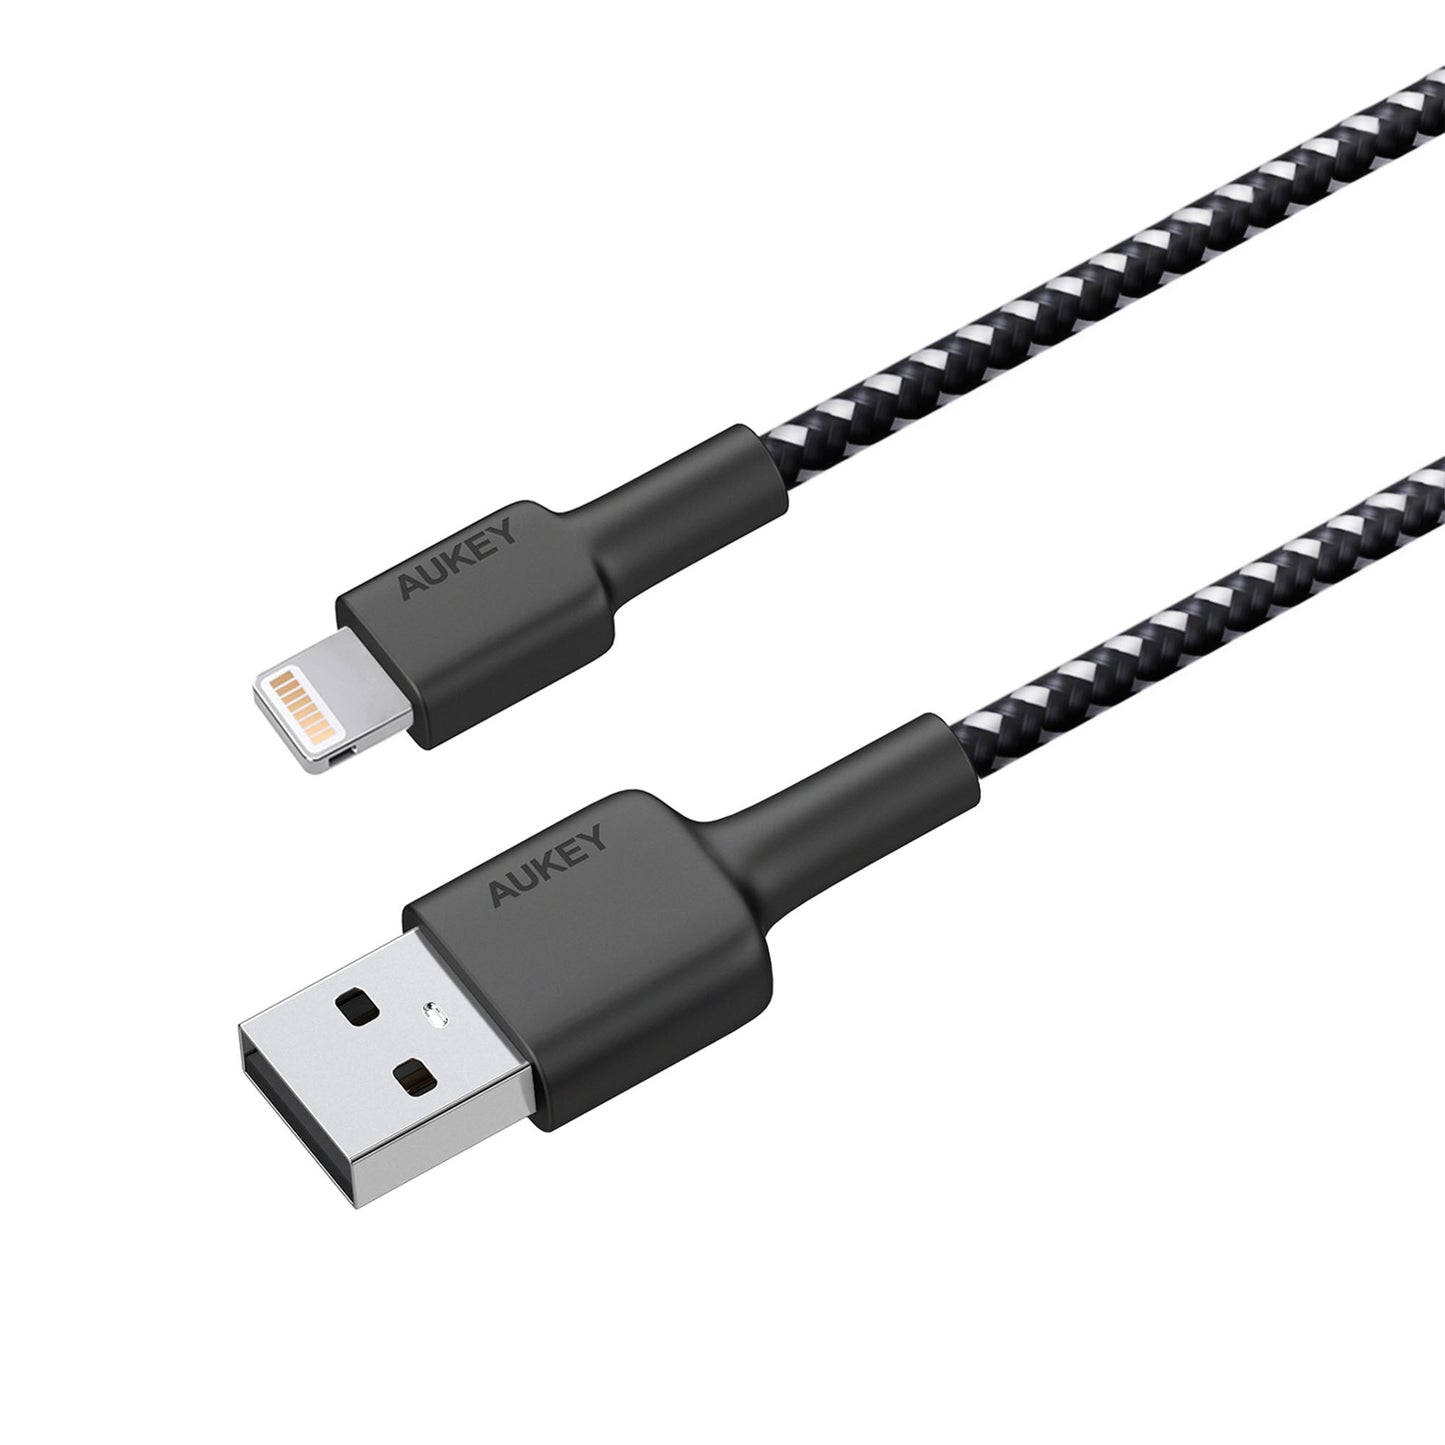 AUKEY MFI Certified Braided Lightning Cable 1.2m - Black